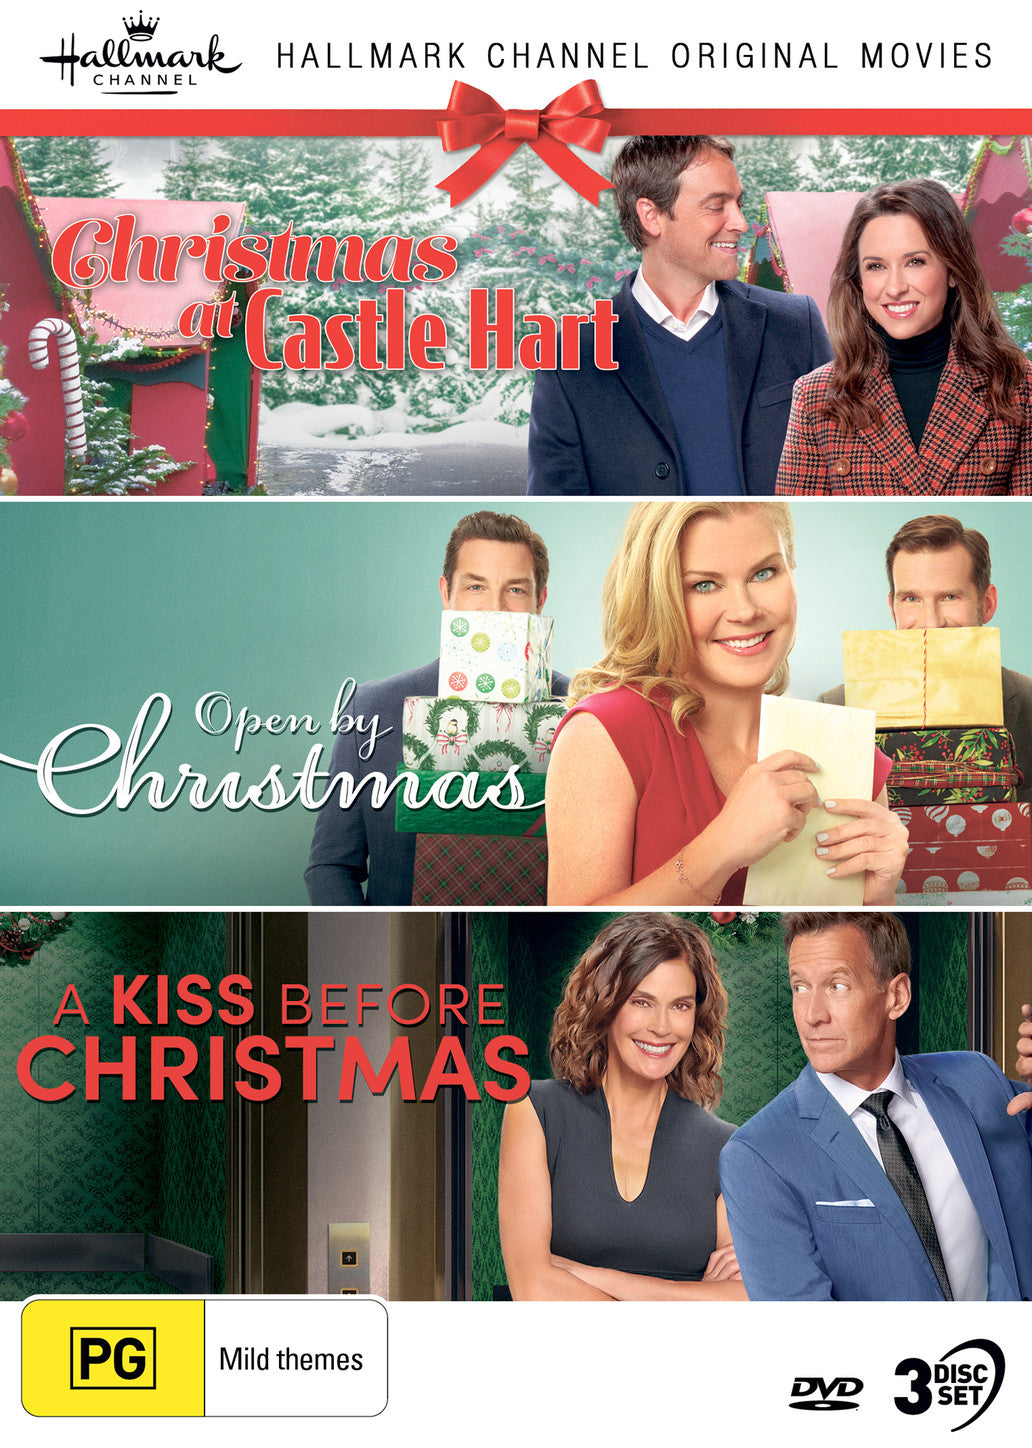 HALLMARK CHRISTMAS COLLECTION 25 (CHRISTMAS AT CASTLE HART/OPEN BY CHRISTMAS/A KISS BEFORE CHRISTMAS)